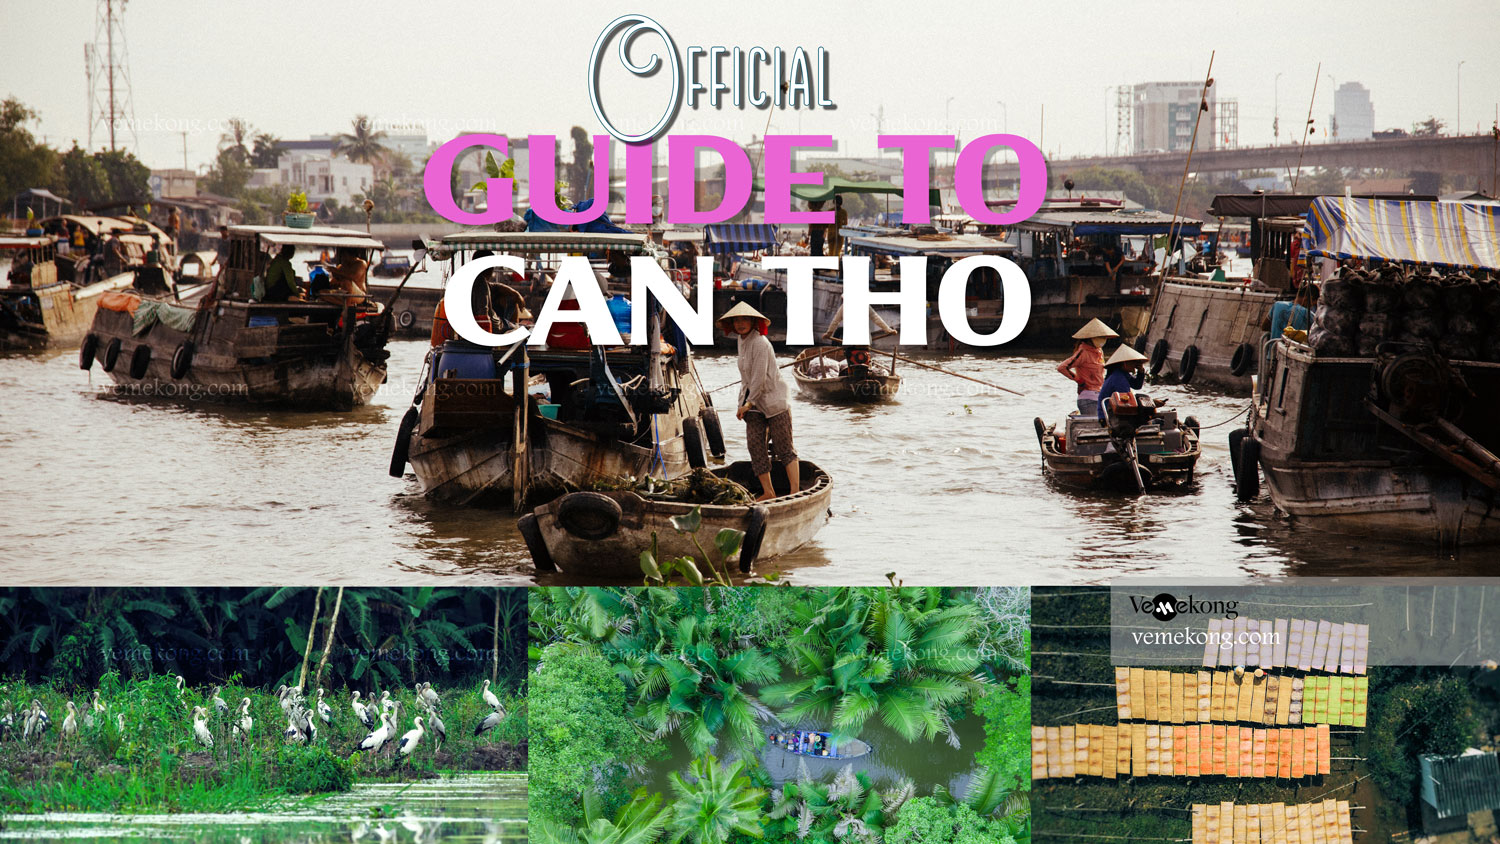 Can Tho Travel Guide - The Official Visitor Information Center